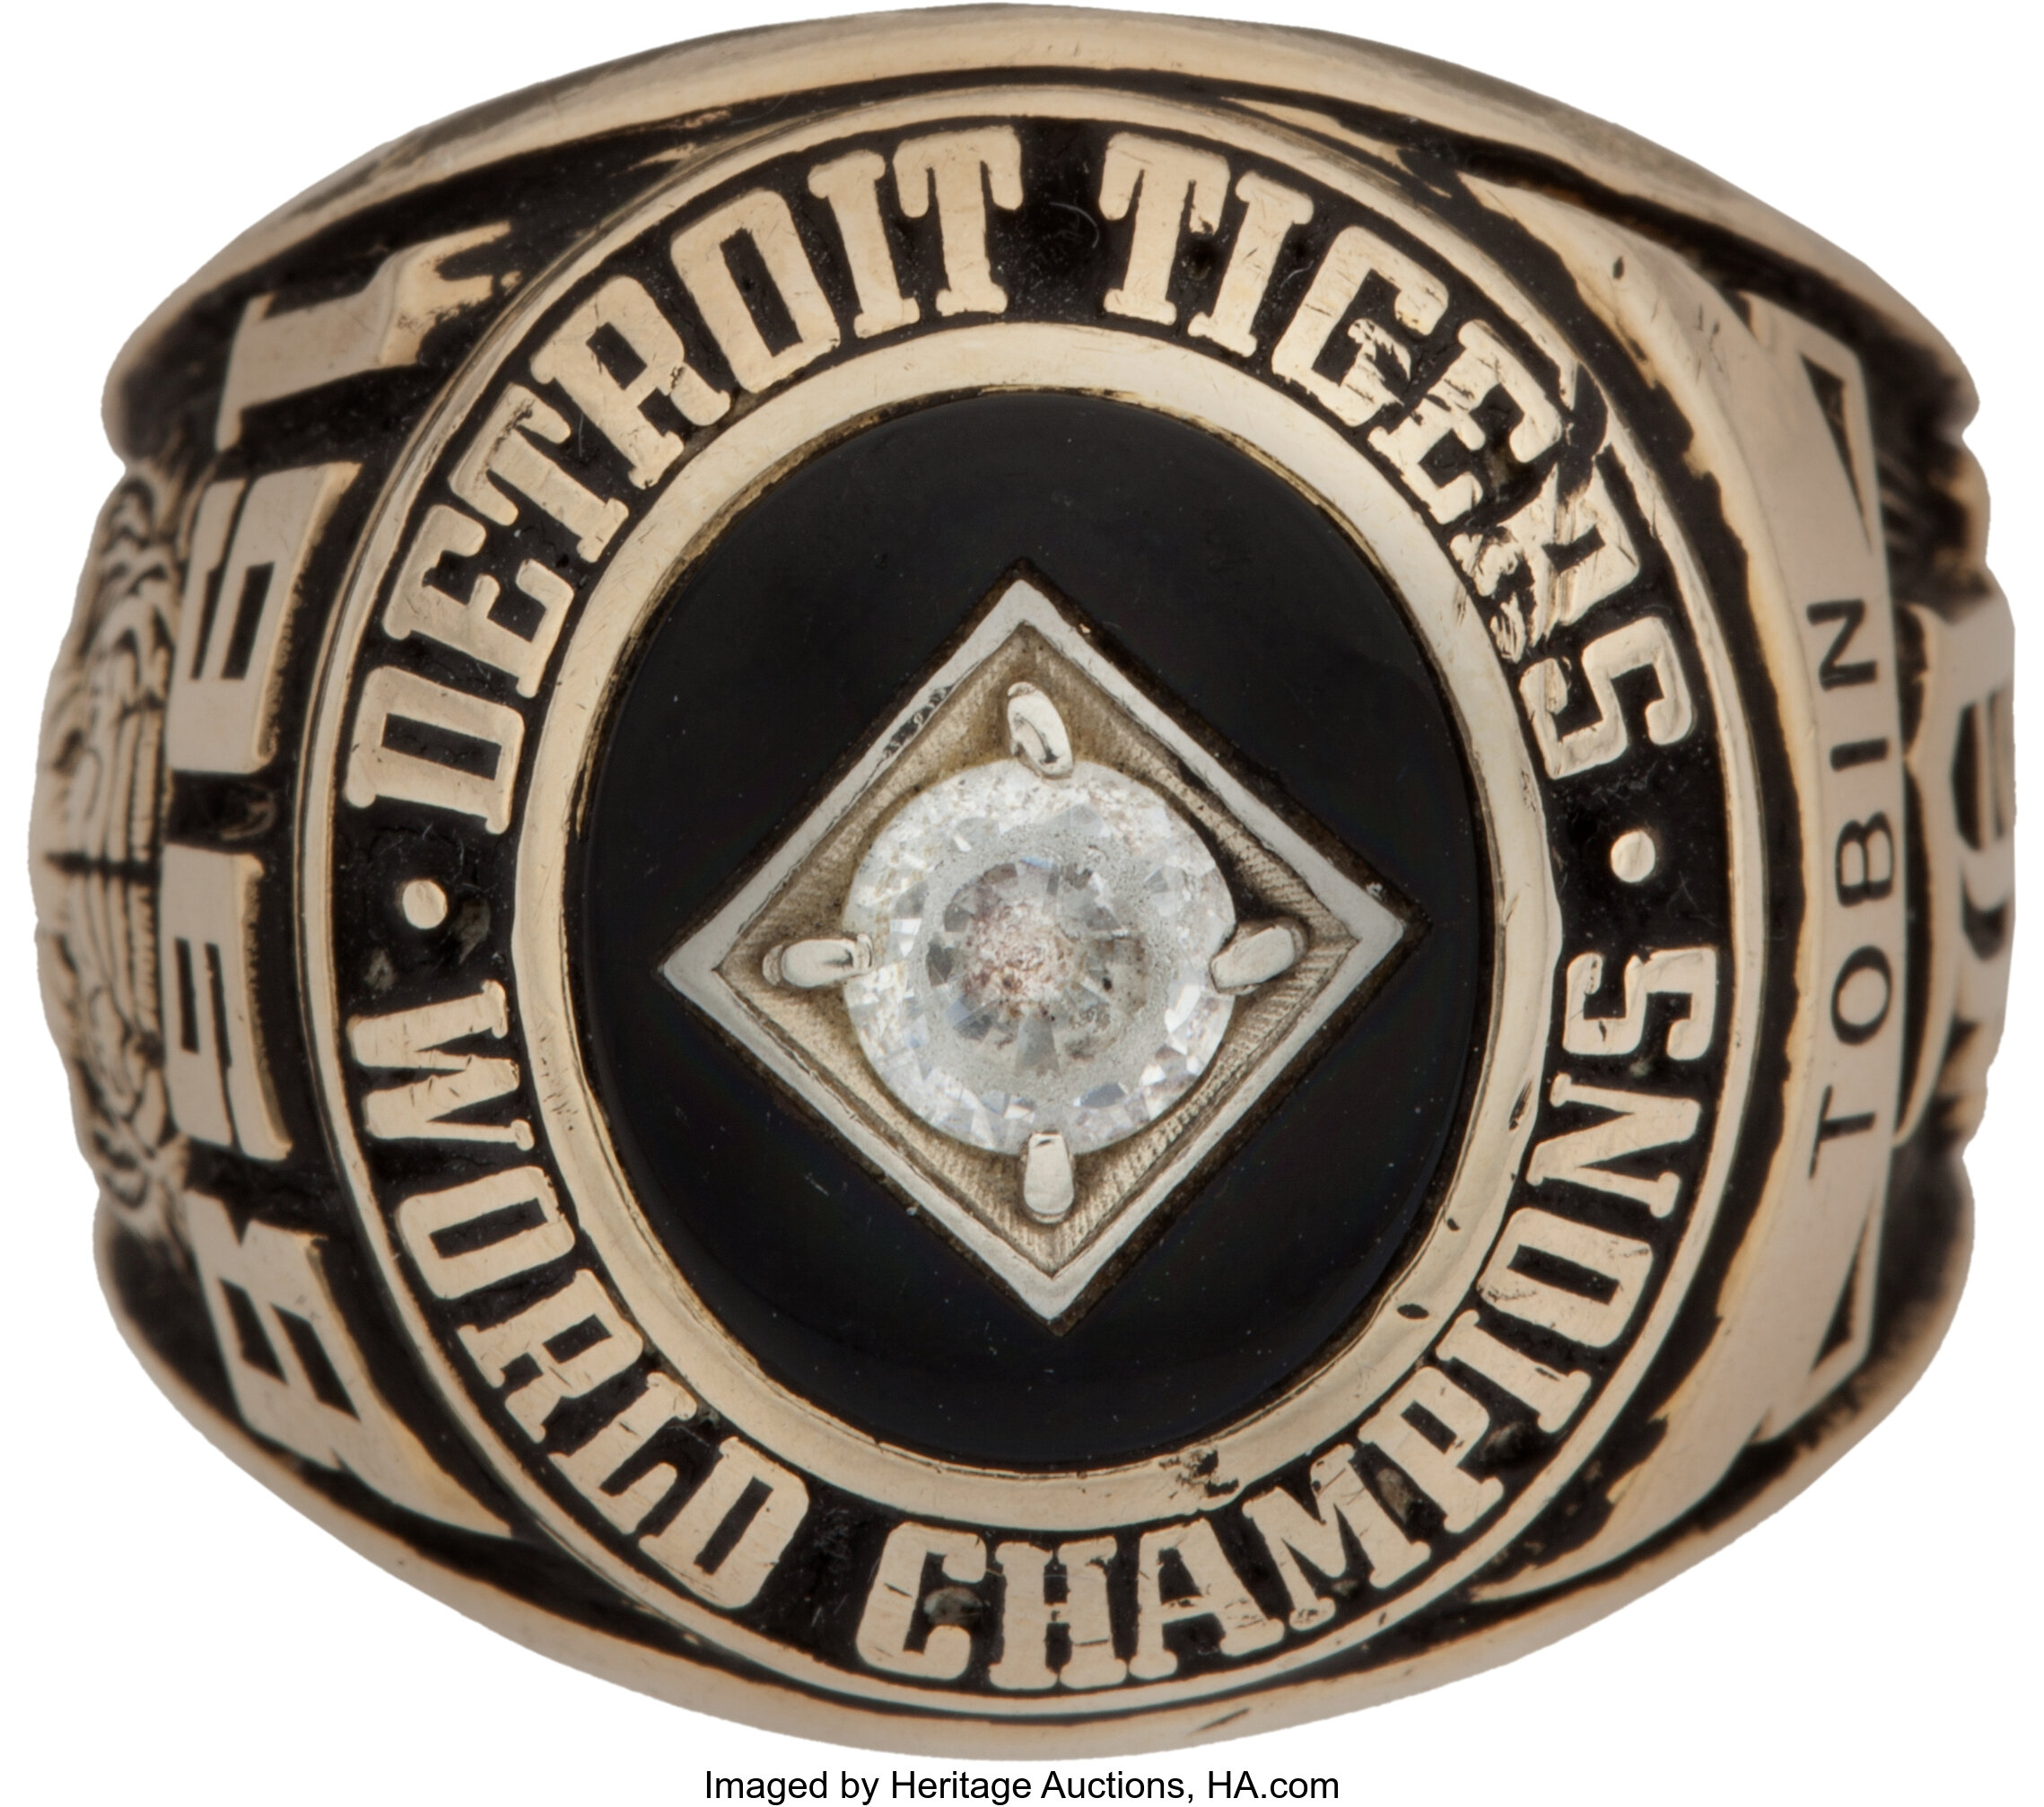 Detroit Tigers News: 1968 World Series, surgery updates, and new